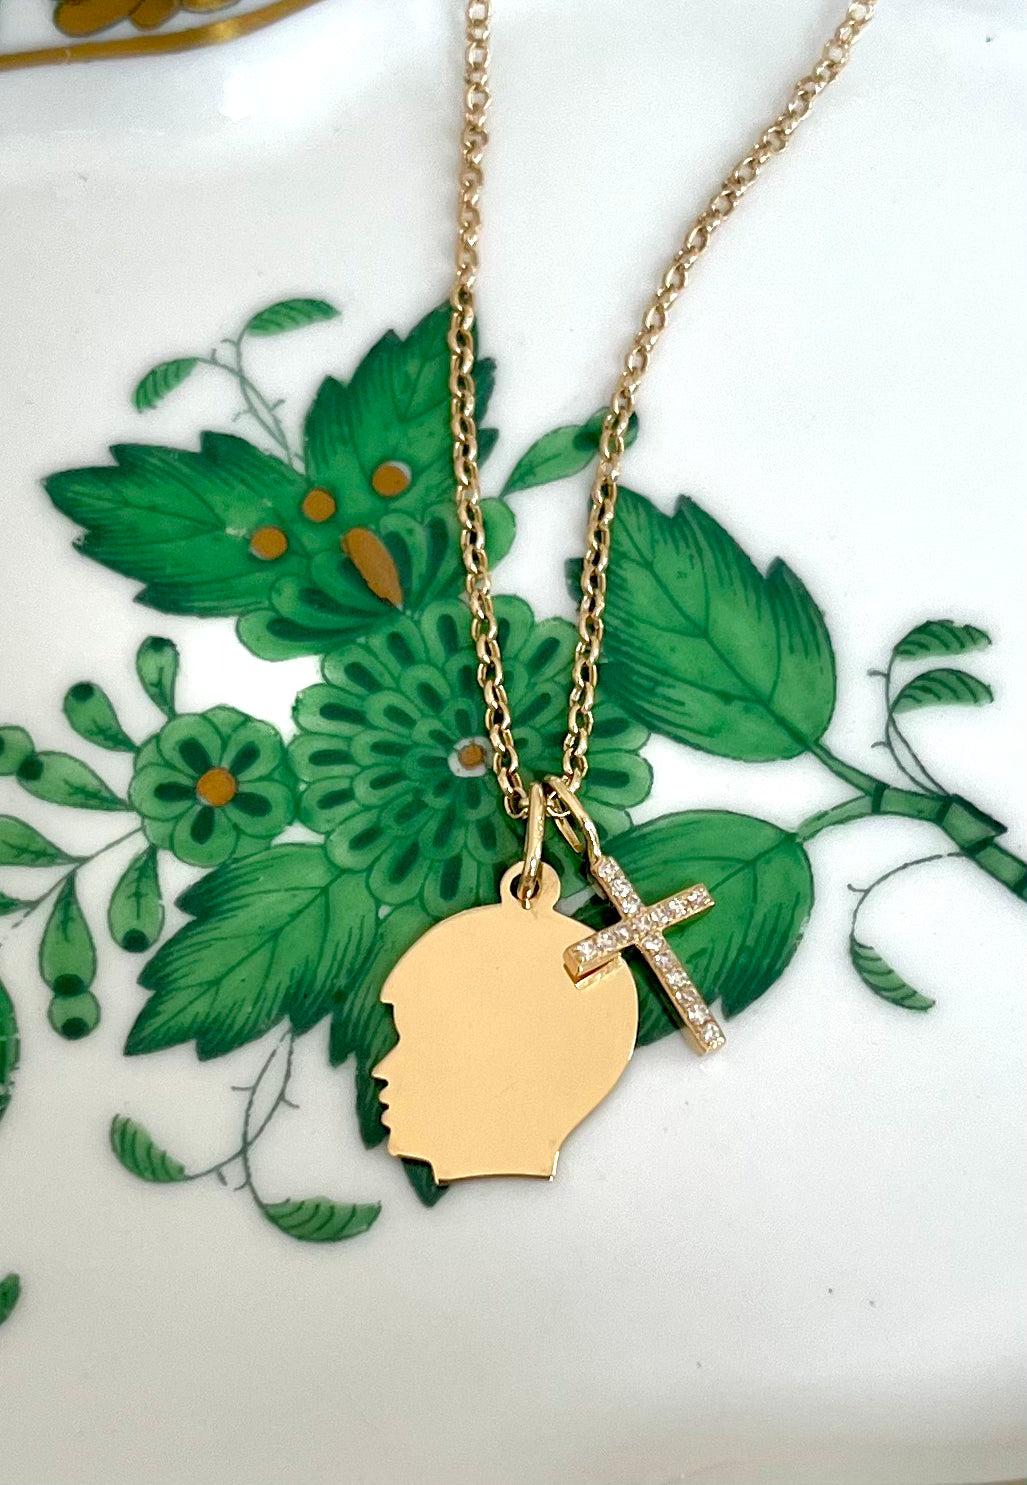 Petite Heirloom Silhouette Necklace 14K Gold